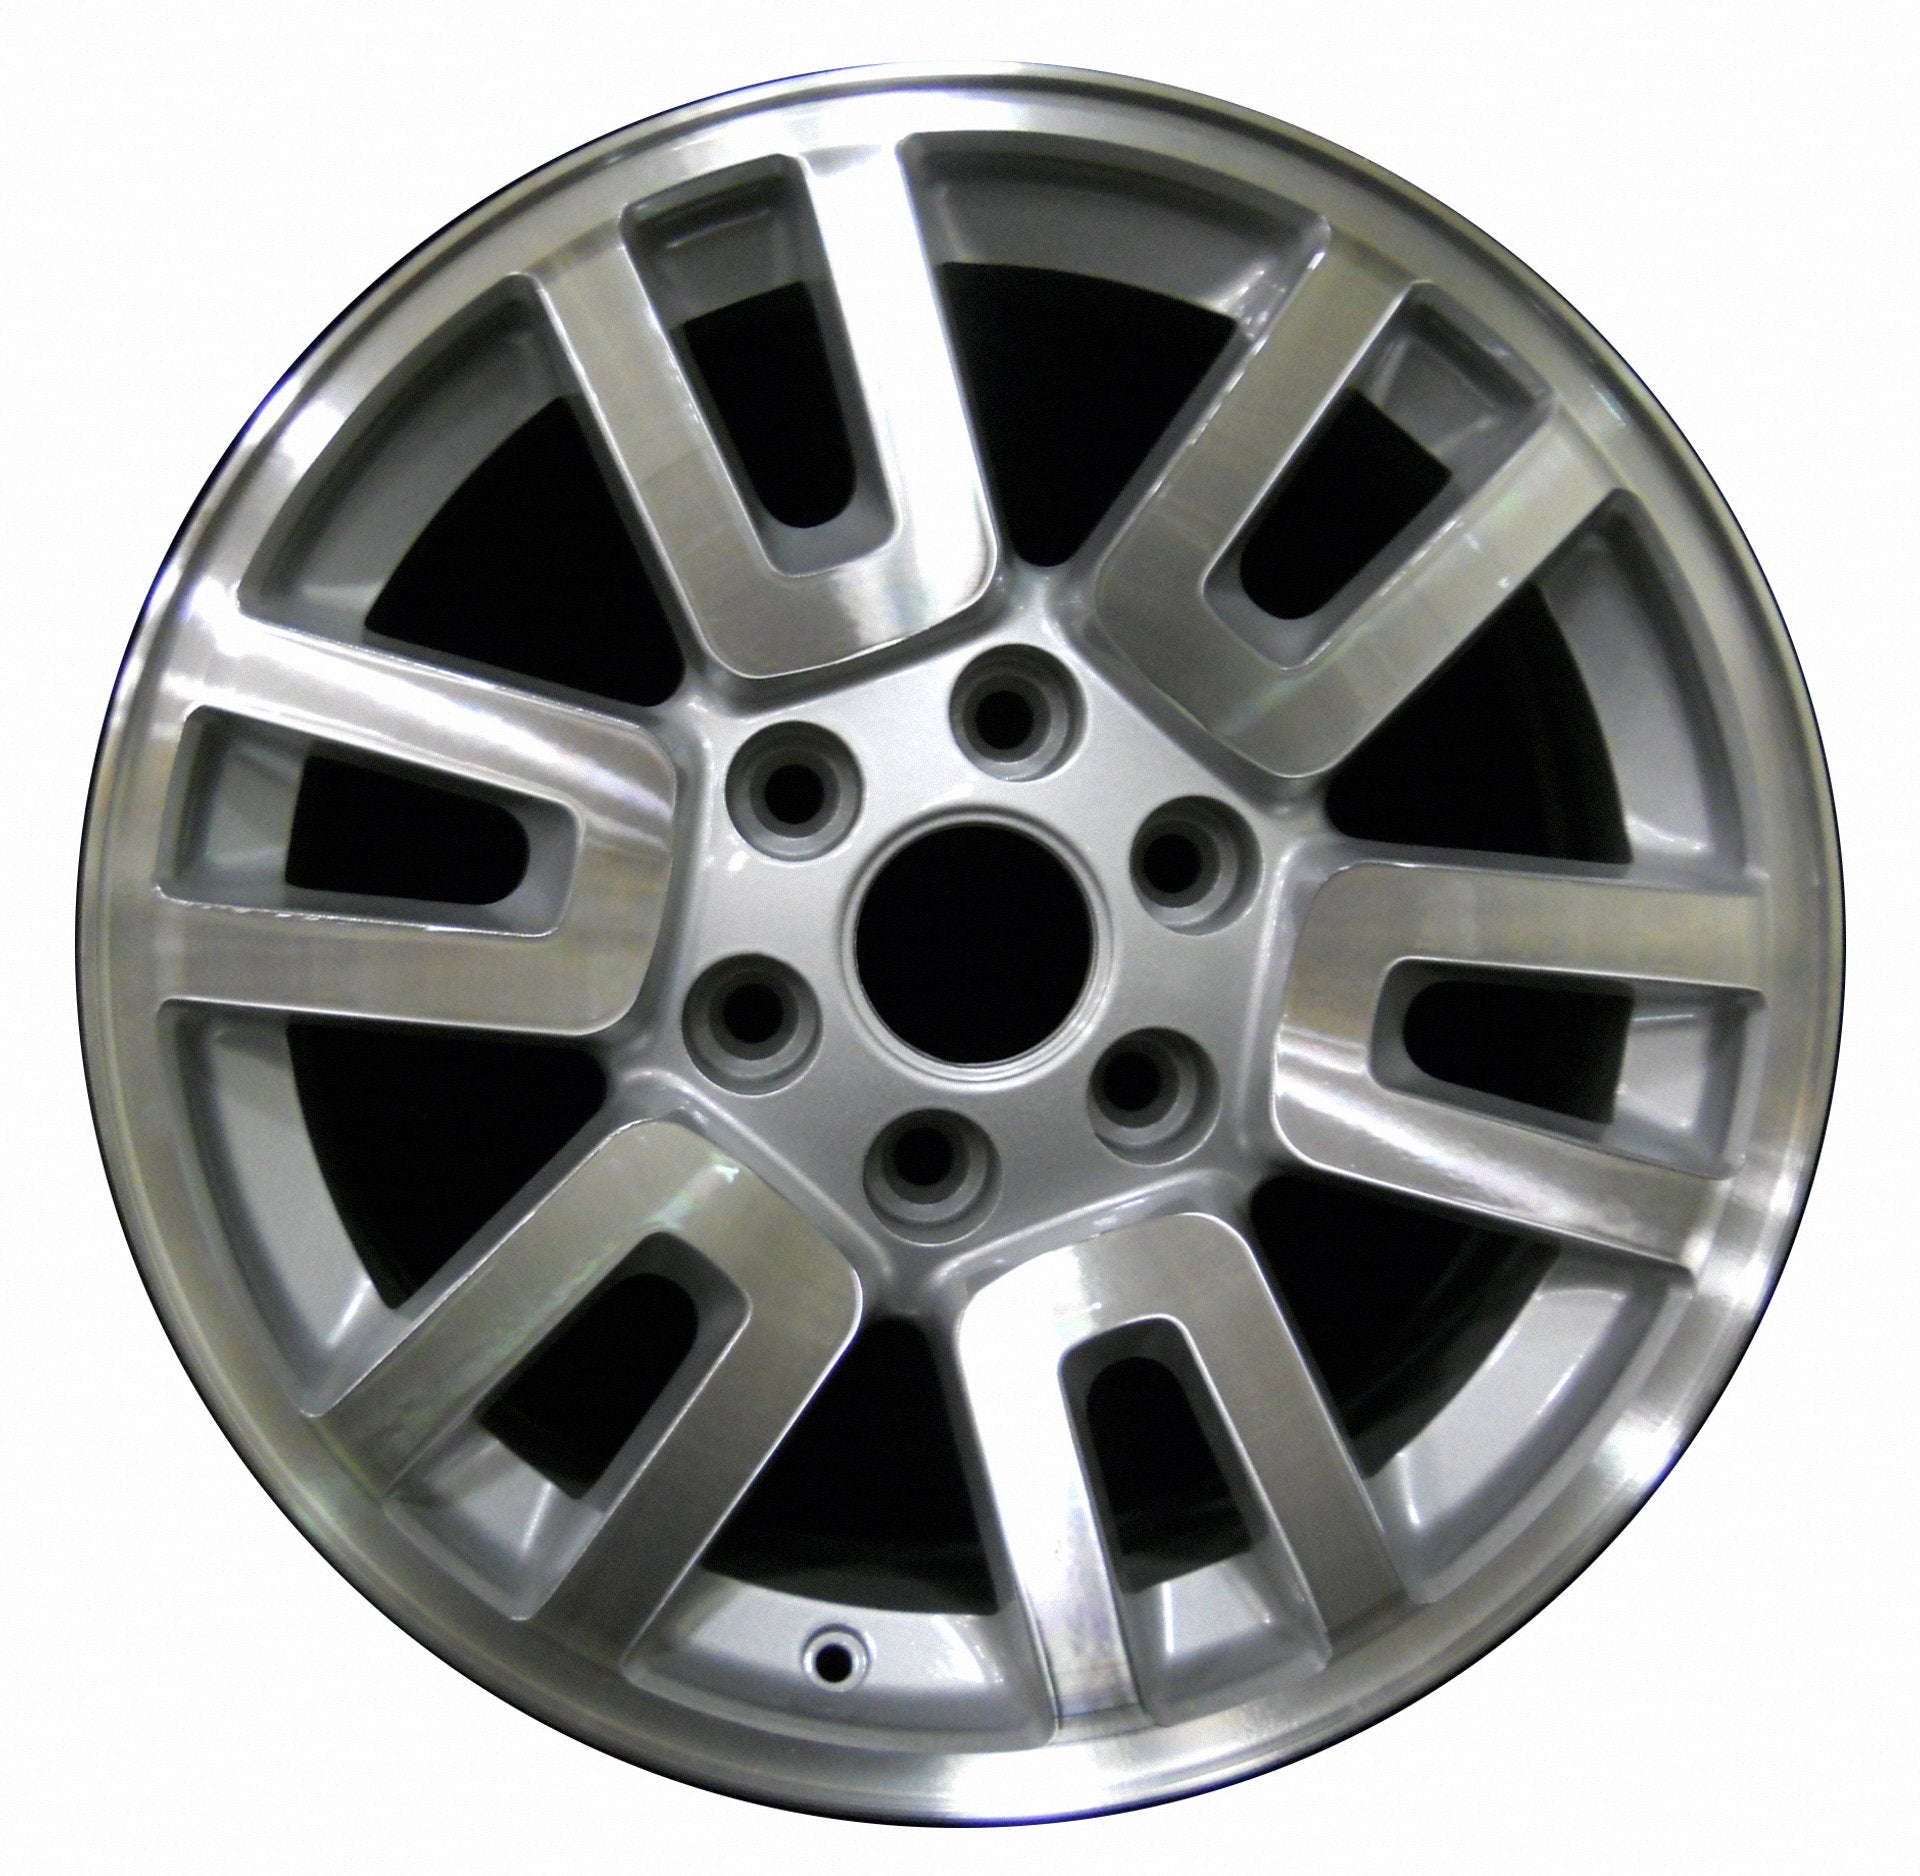 Ford Expedition  2007, 2008, 2009, 2010, 2011, 2012, 2013, 2014 Factory OEM Car Wheel Size 18x8.5 Alloy WAO.3657.PS02.TMA